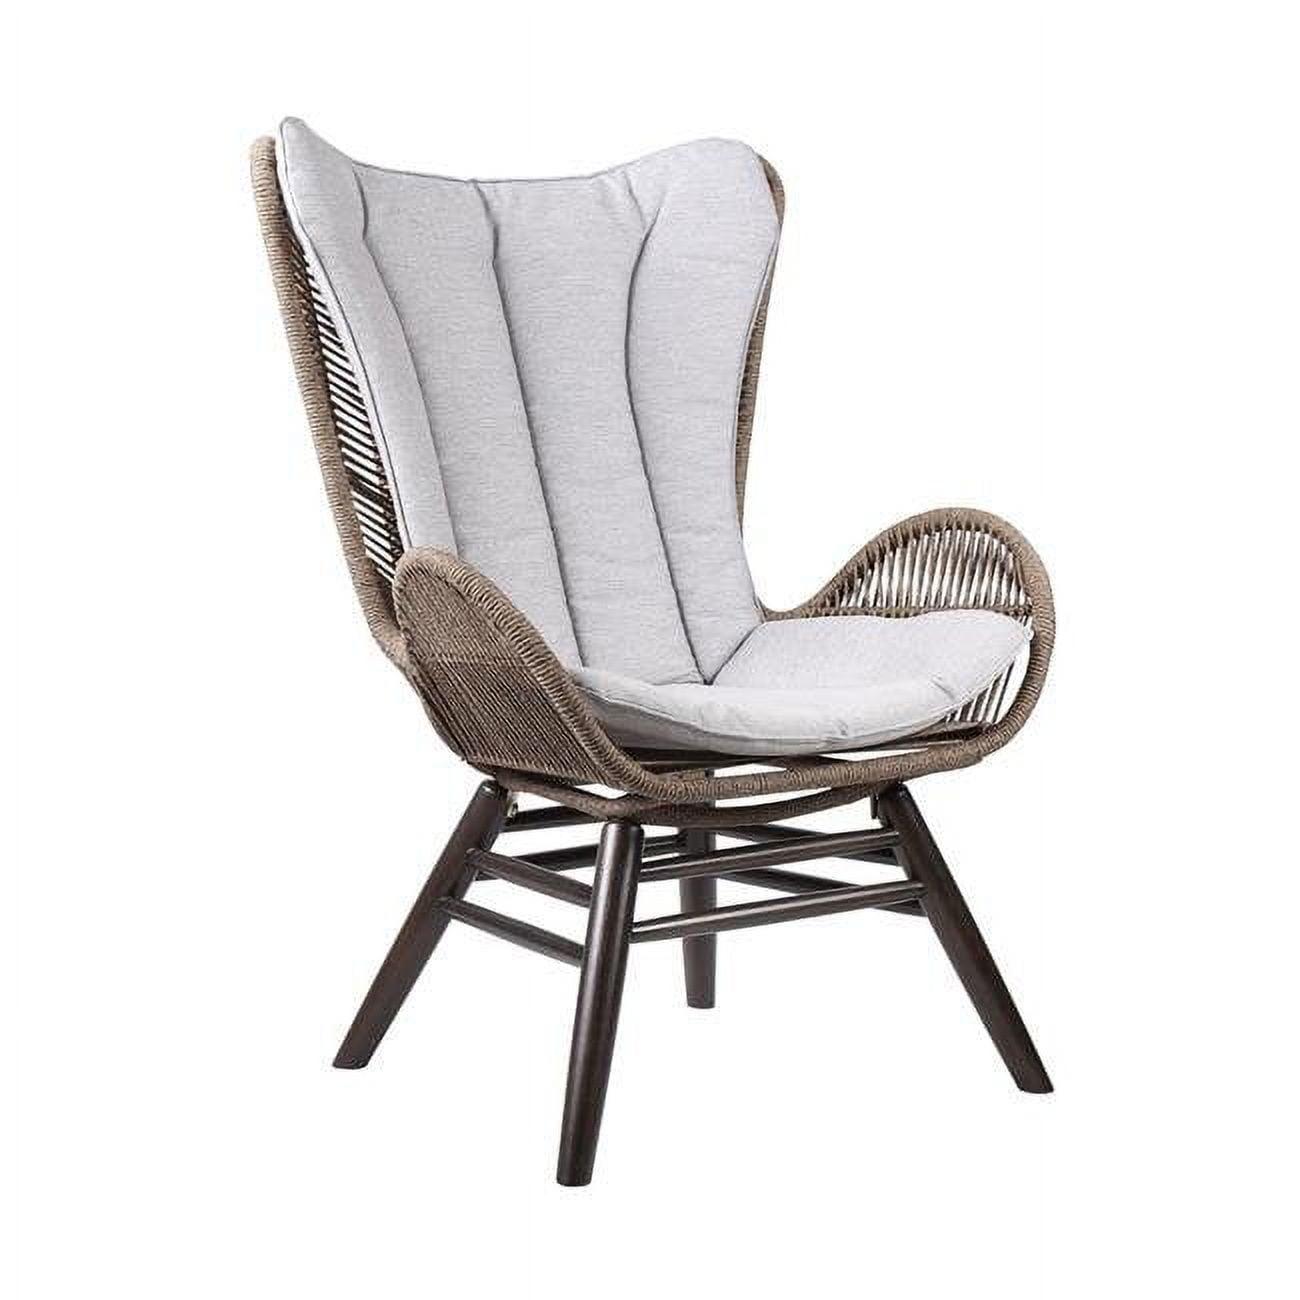 Contemporary Dark Eucalyptus and Gray Rope Lounge Chair with Cushions